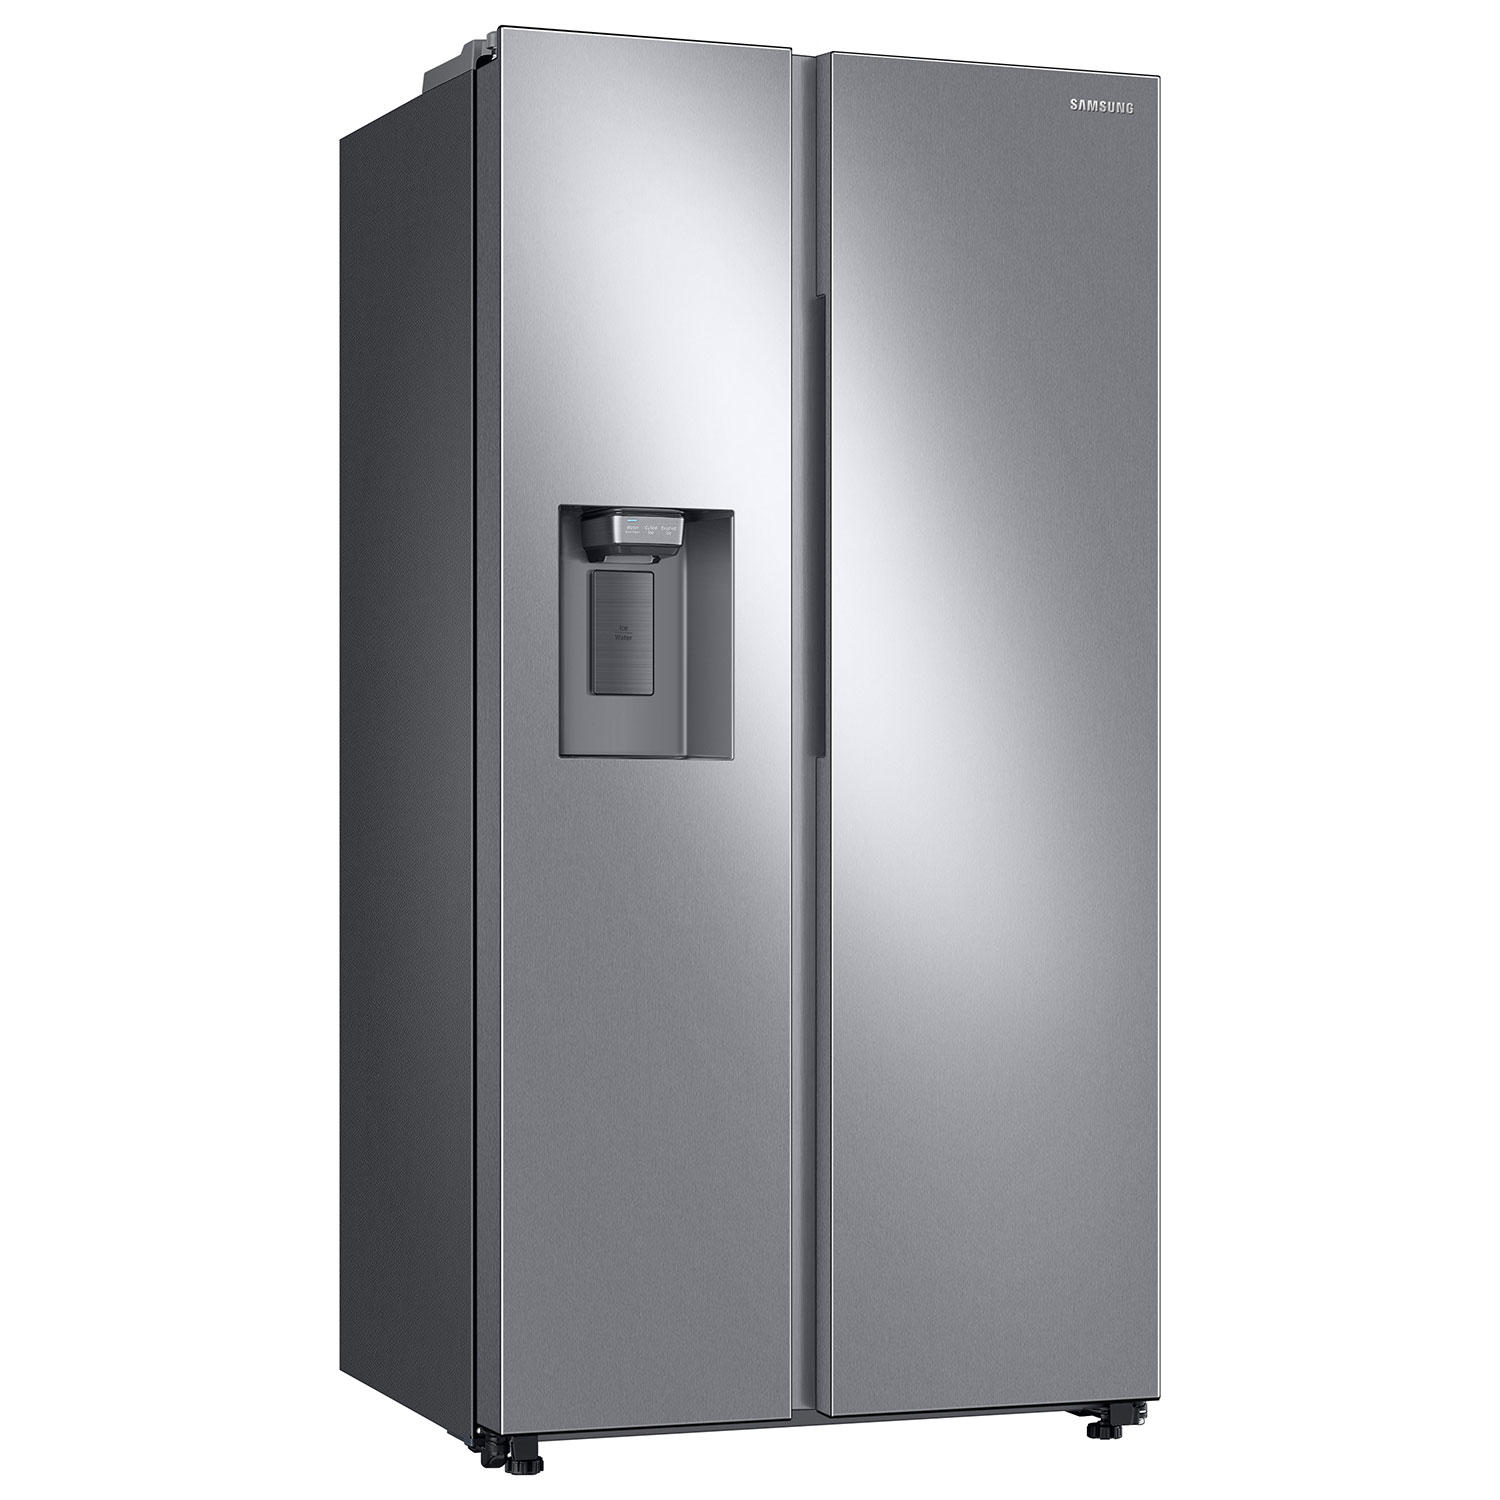 Samsung 22 cu. ft. Counter Depth Side By Side Refrigerator - Black Stainless Steel